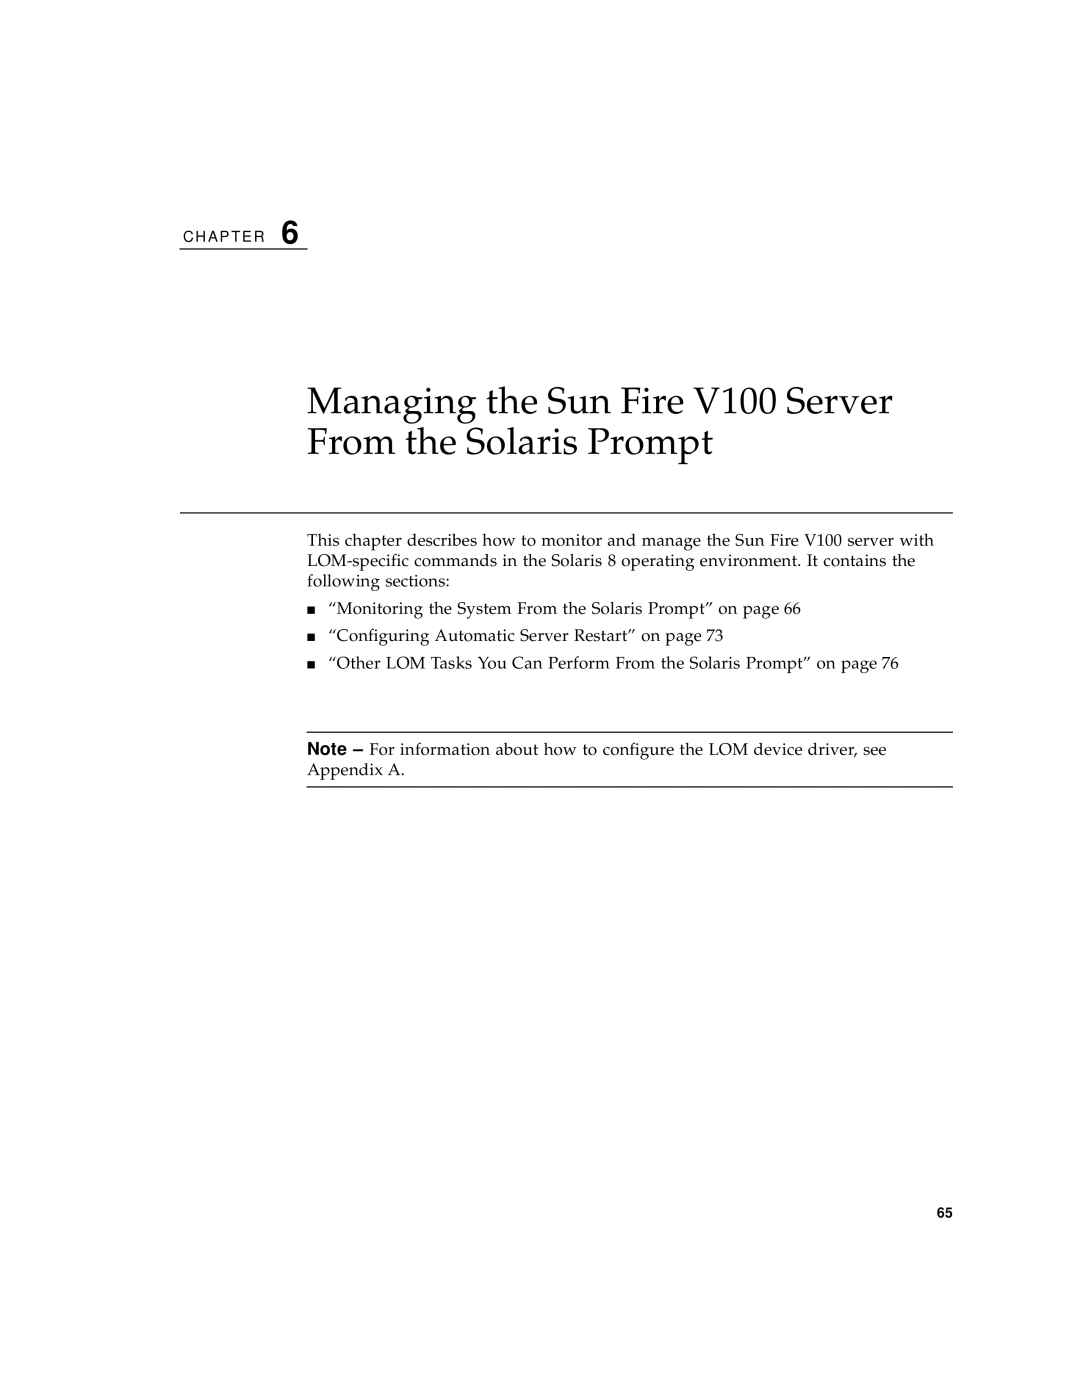 Sun Microsystems manual Managing the Sun Fire V100 Server From the Solaris Prompt 